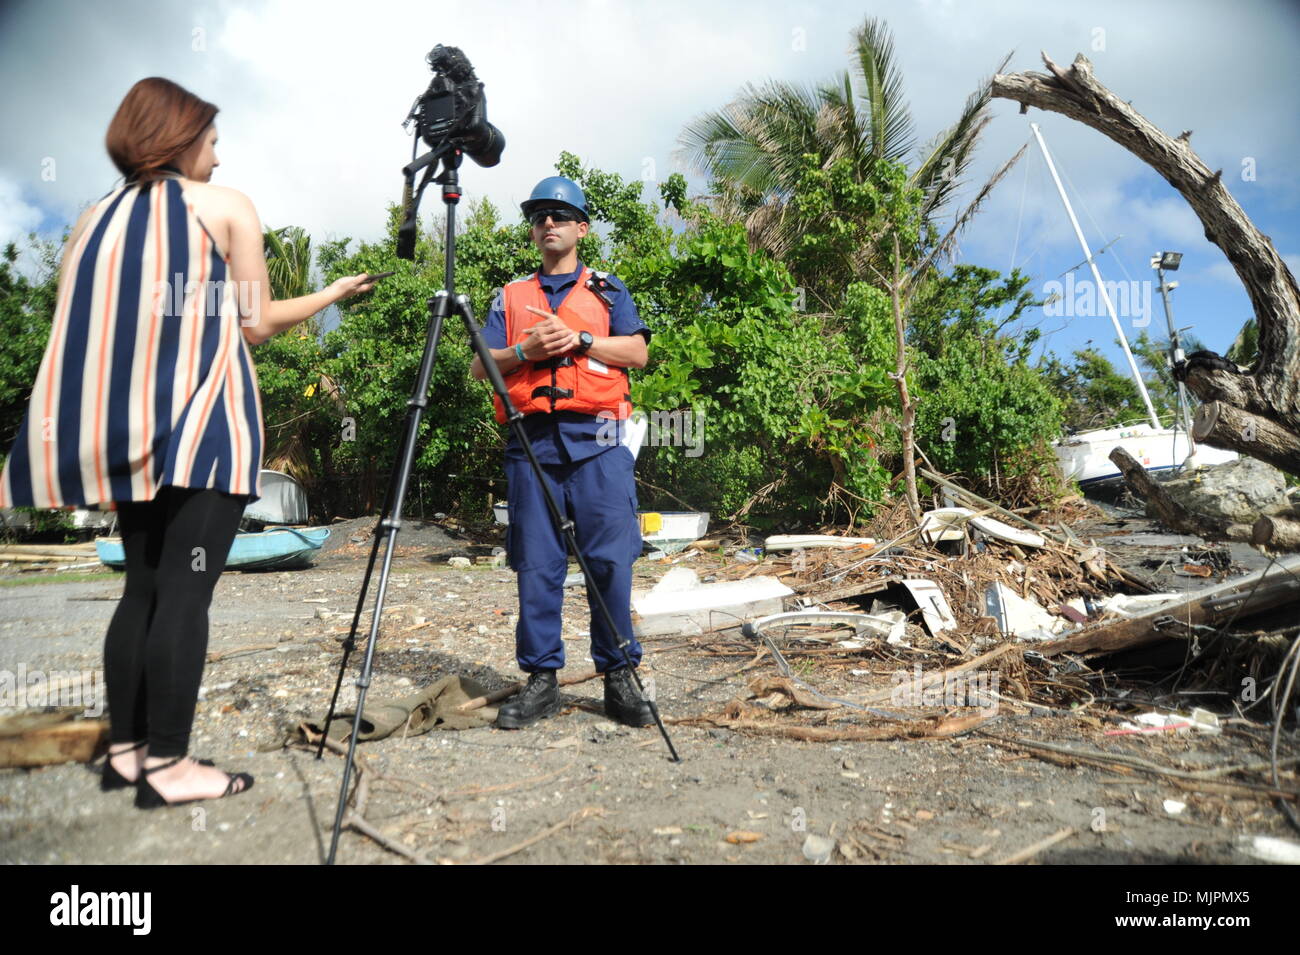 Coast Guard Petty Officer 1st Class Mark Molina, with the Hurricane Maria ESF-10 Puerto Rico response, is interviewed by reporter Heidee Rolón with El Nuevo Día, as salvage crews working with ESF-10 use a crane barge to remove a wrecked vessel in Sardinera, Puerto Rico, Dec. 21, 2017. The ESF-10 is offering no-cost options for removing vessels damaged by Hurricane Maria; affected boat owners are asked to call the Vessel Owner Outreach Hotline at (786) 521-3900. (U.S. Coast Guard photo by Petty Officer 2nd Class Lisa Ferdinando) Stock Photo